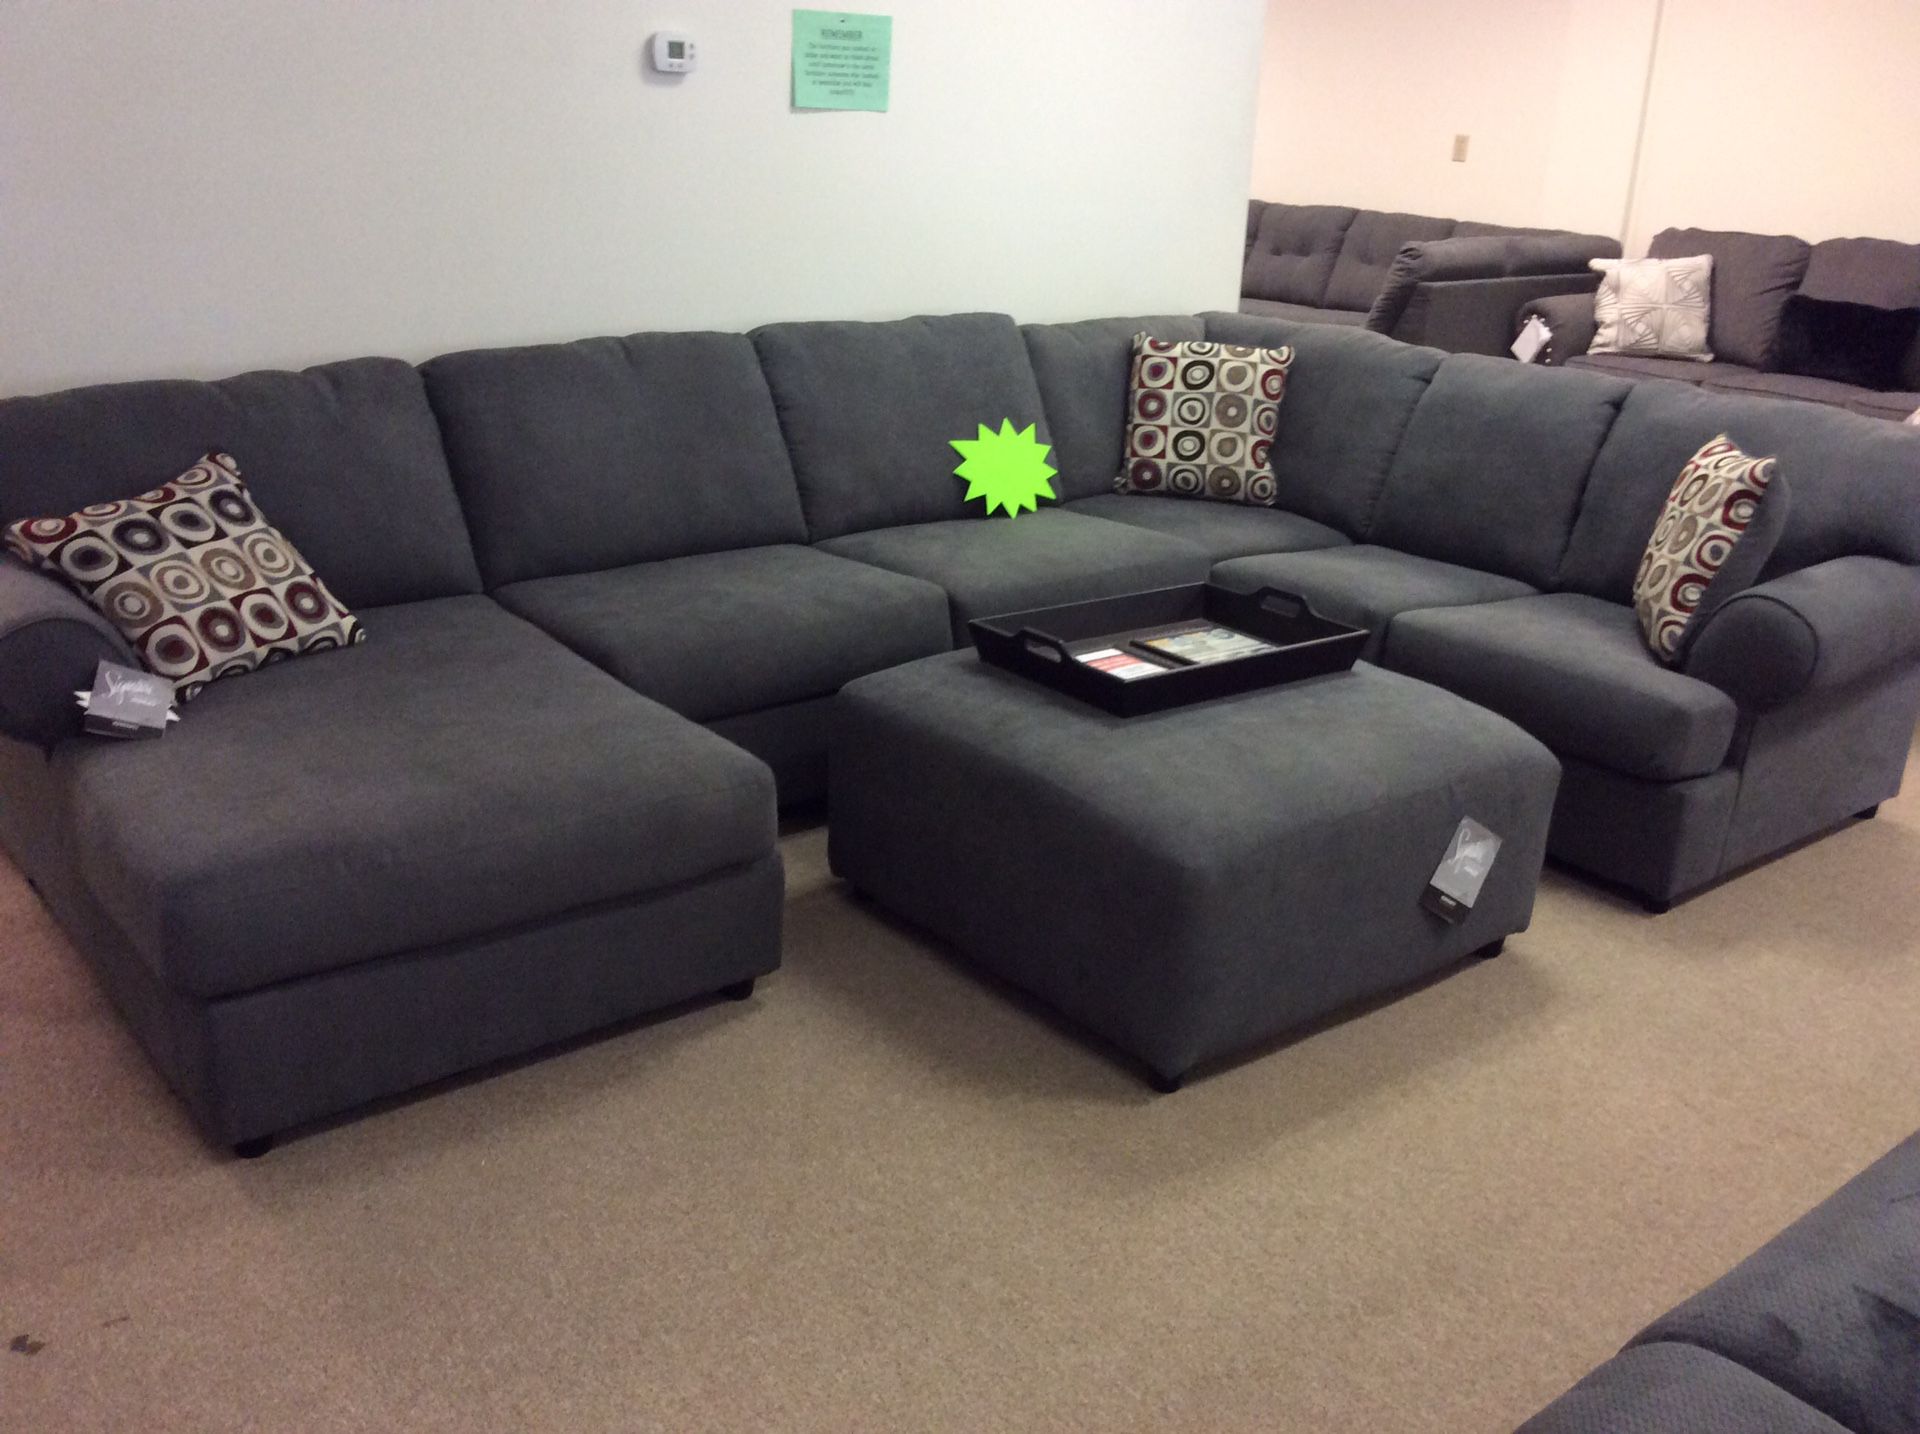 Brand new ashley 3 piece sectional in stock today!!!